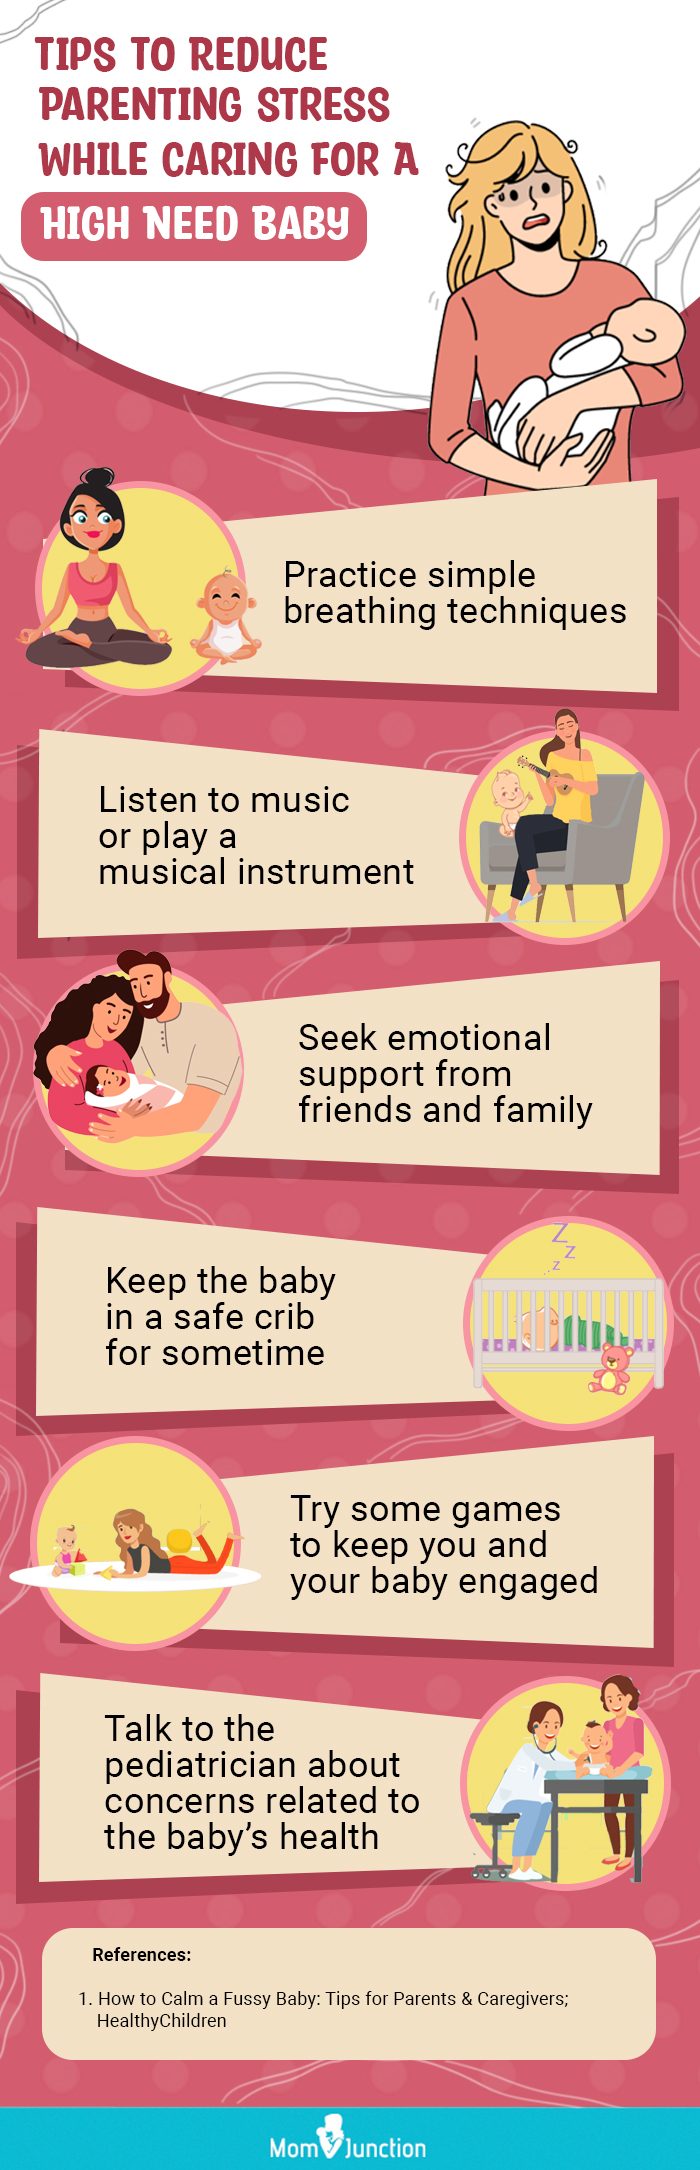 tips to reduce parenting stress while caring for a high need baby (infographic)